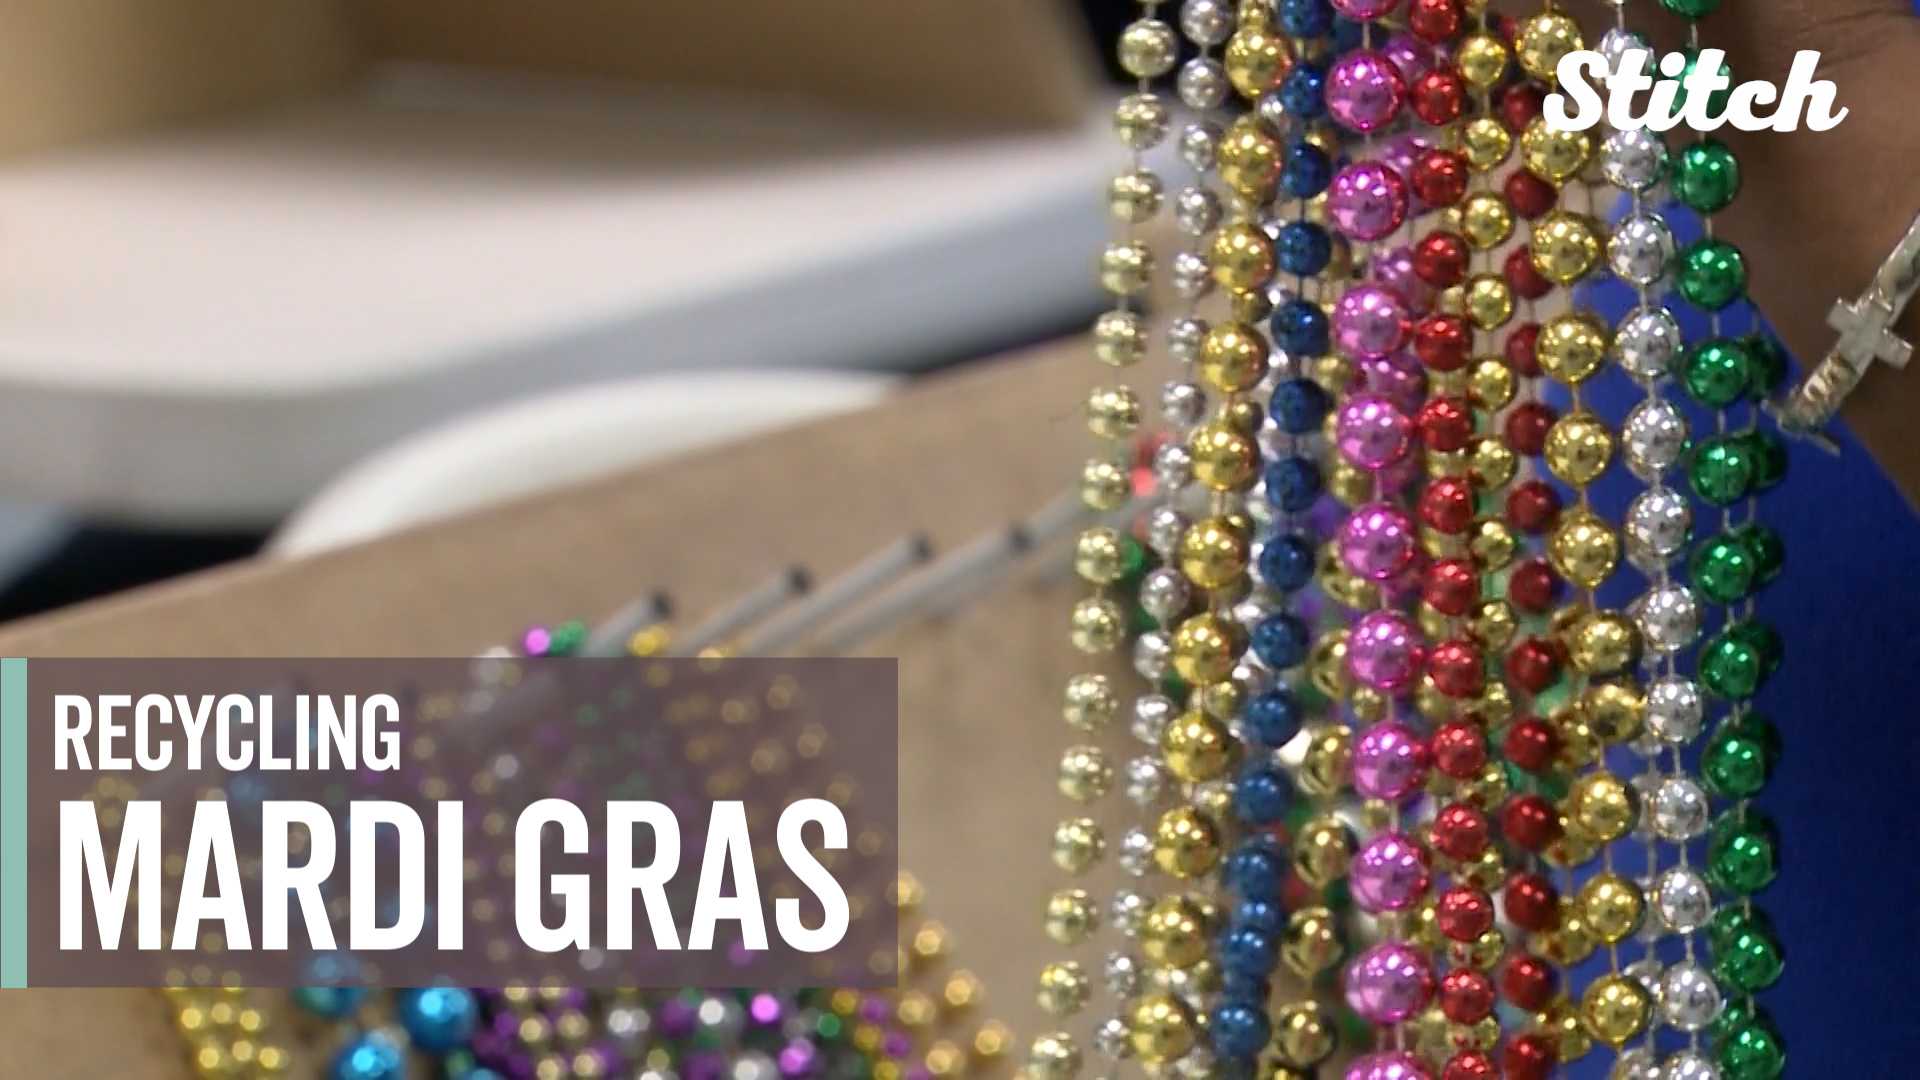 Nonprofit organization hires adults with disabilities, recycles Mardi Gras beads